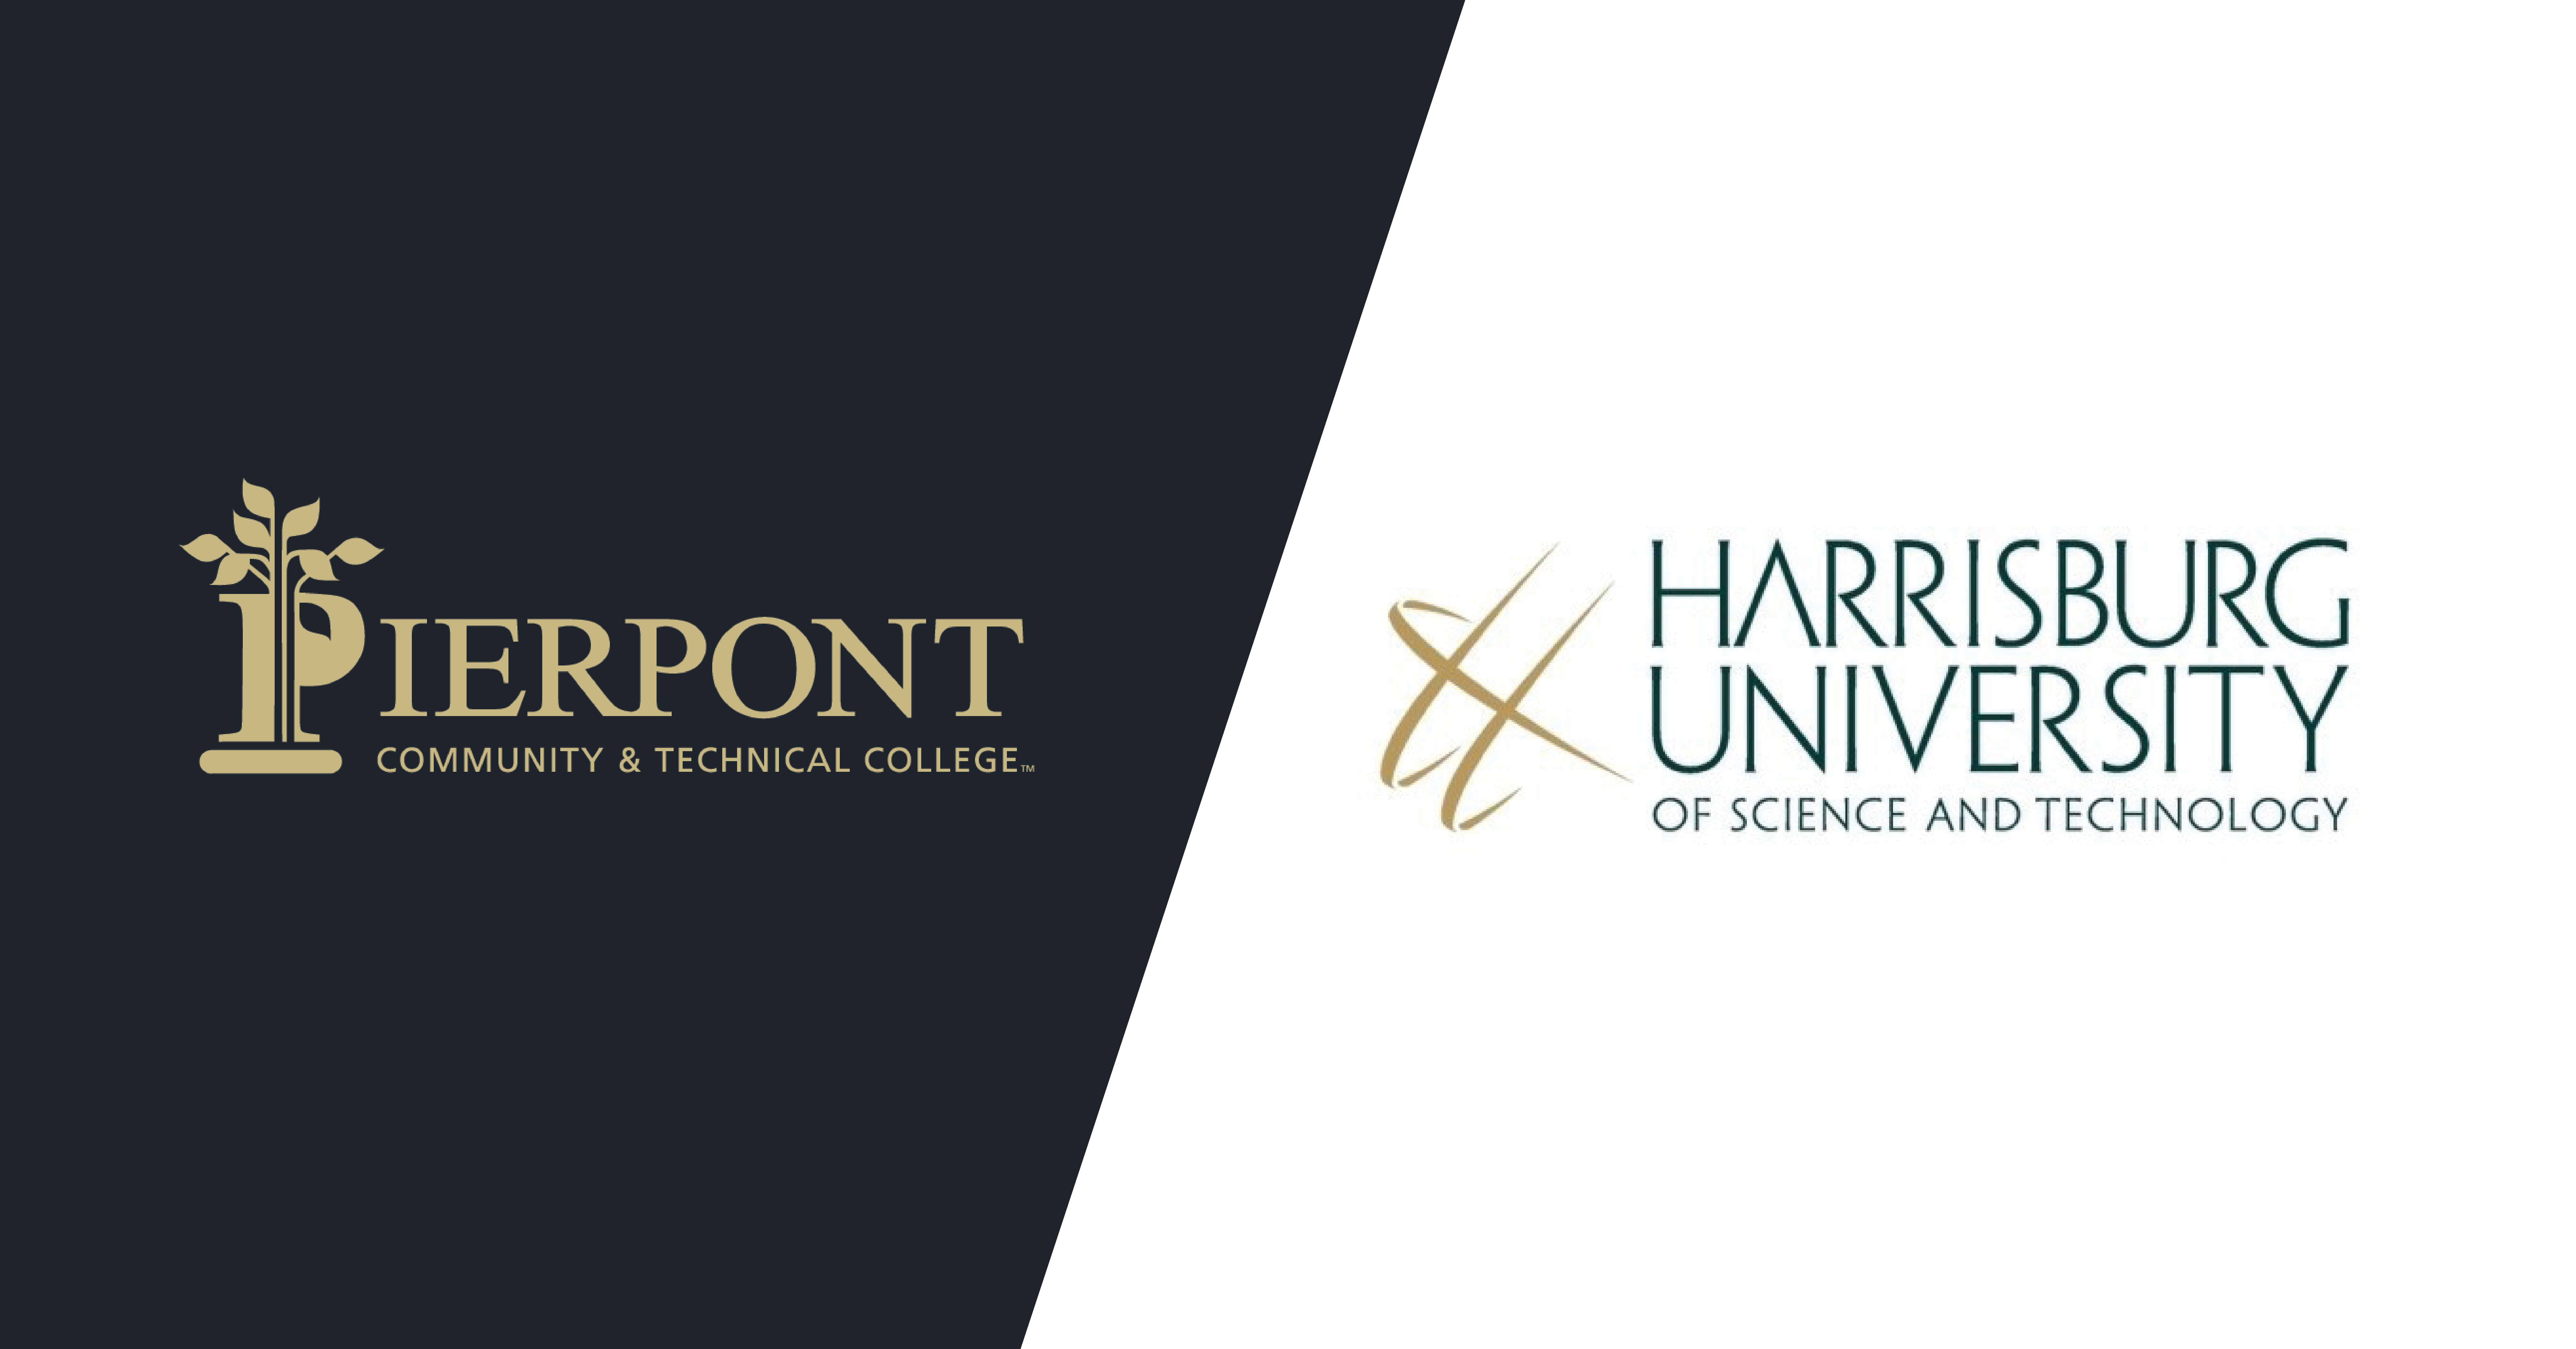 A graphic features the Pierpont and Harrisburg University logos.